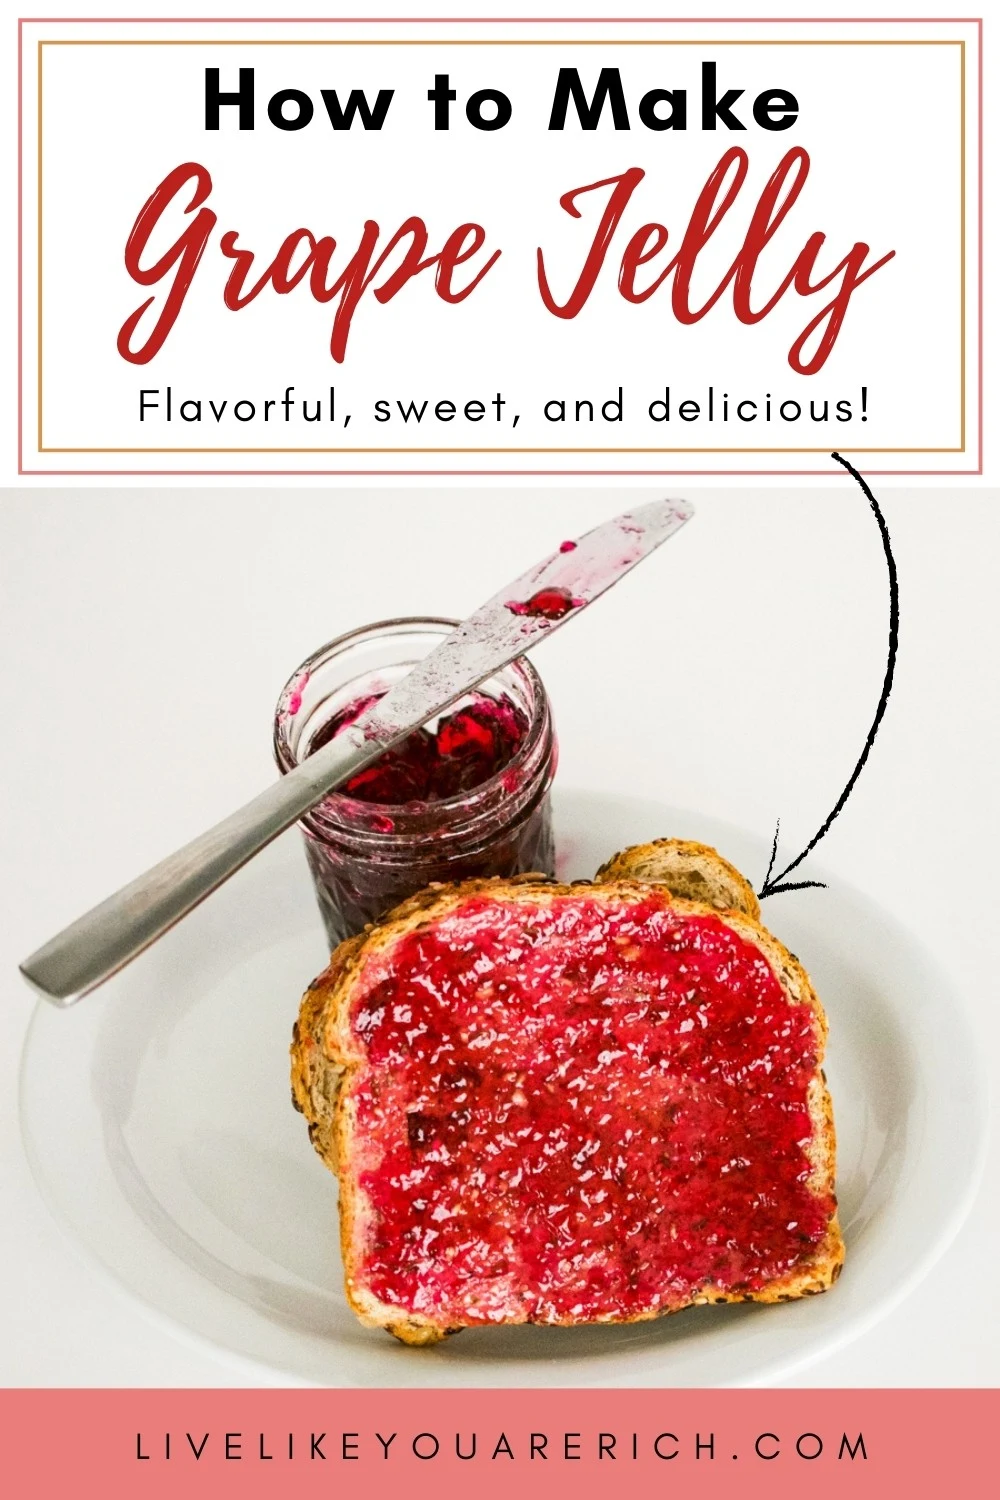 This is my favorite jelly! It is so flavorful, sweet, and delicious! It is easy and quick to make, especially considering the fact that the extras will store for up to a year. I’d highly recommend trying this fantastic recipe. #grapejelly 